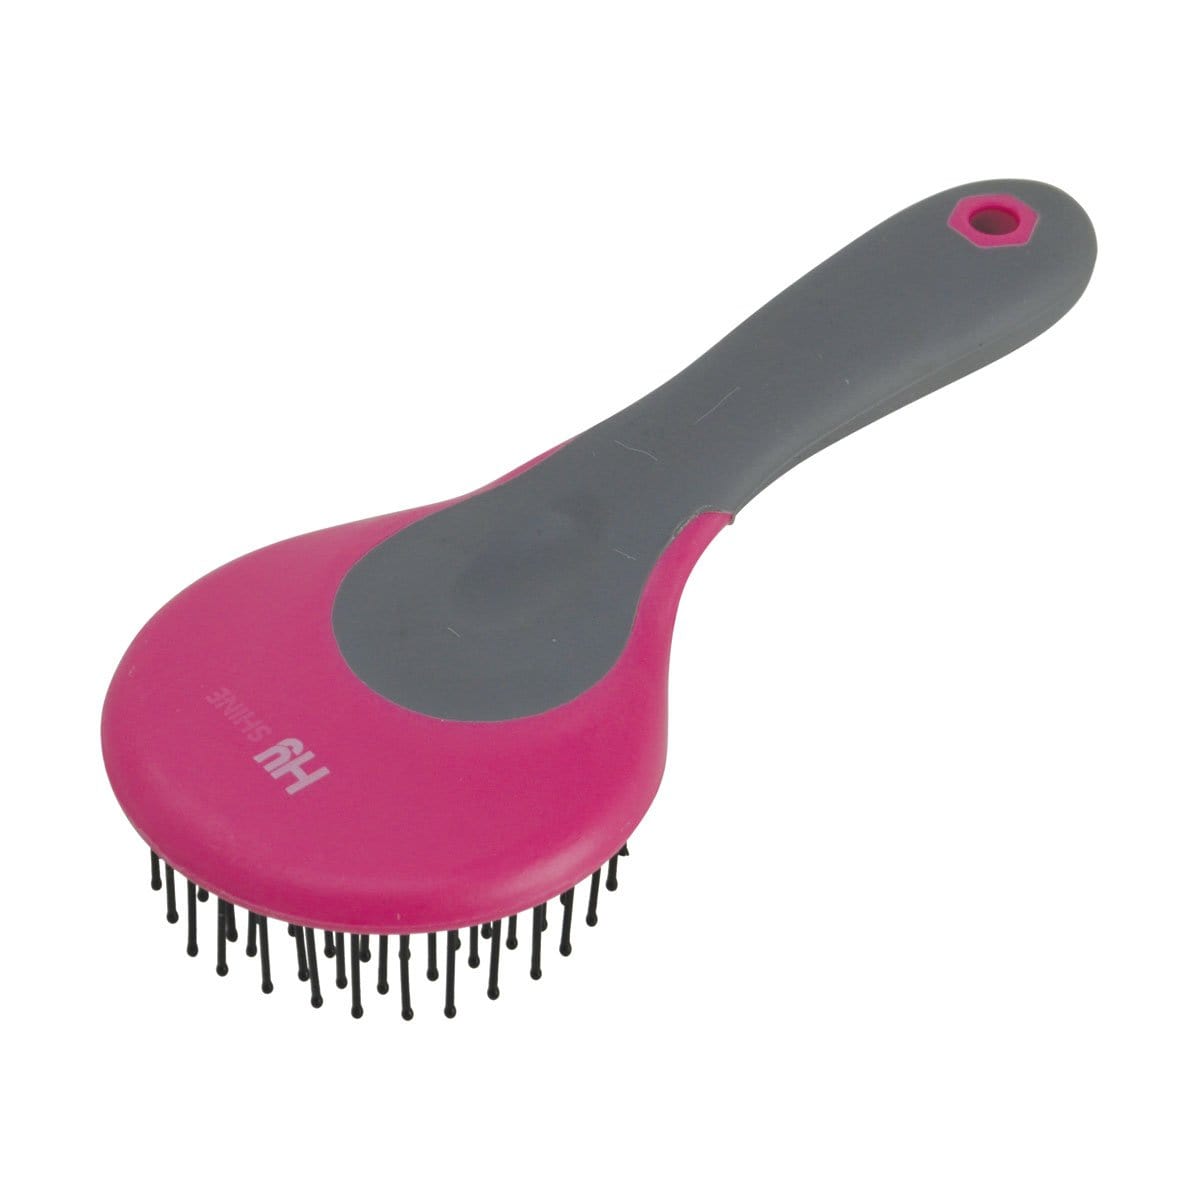 Grooming Deluxe Overall Brush Soft - EquusVitalis Onlineshop